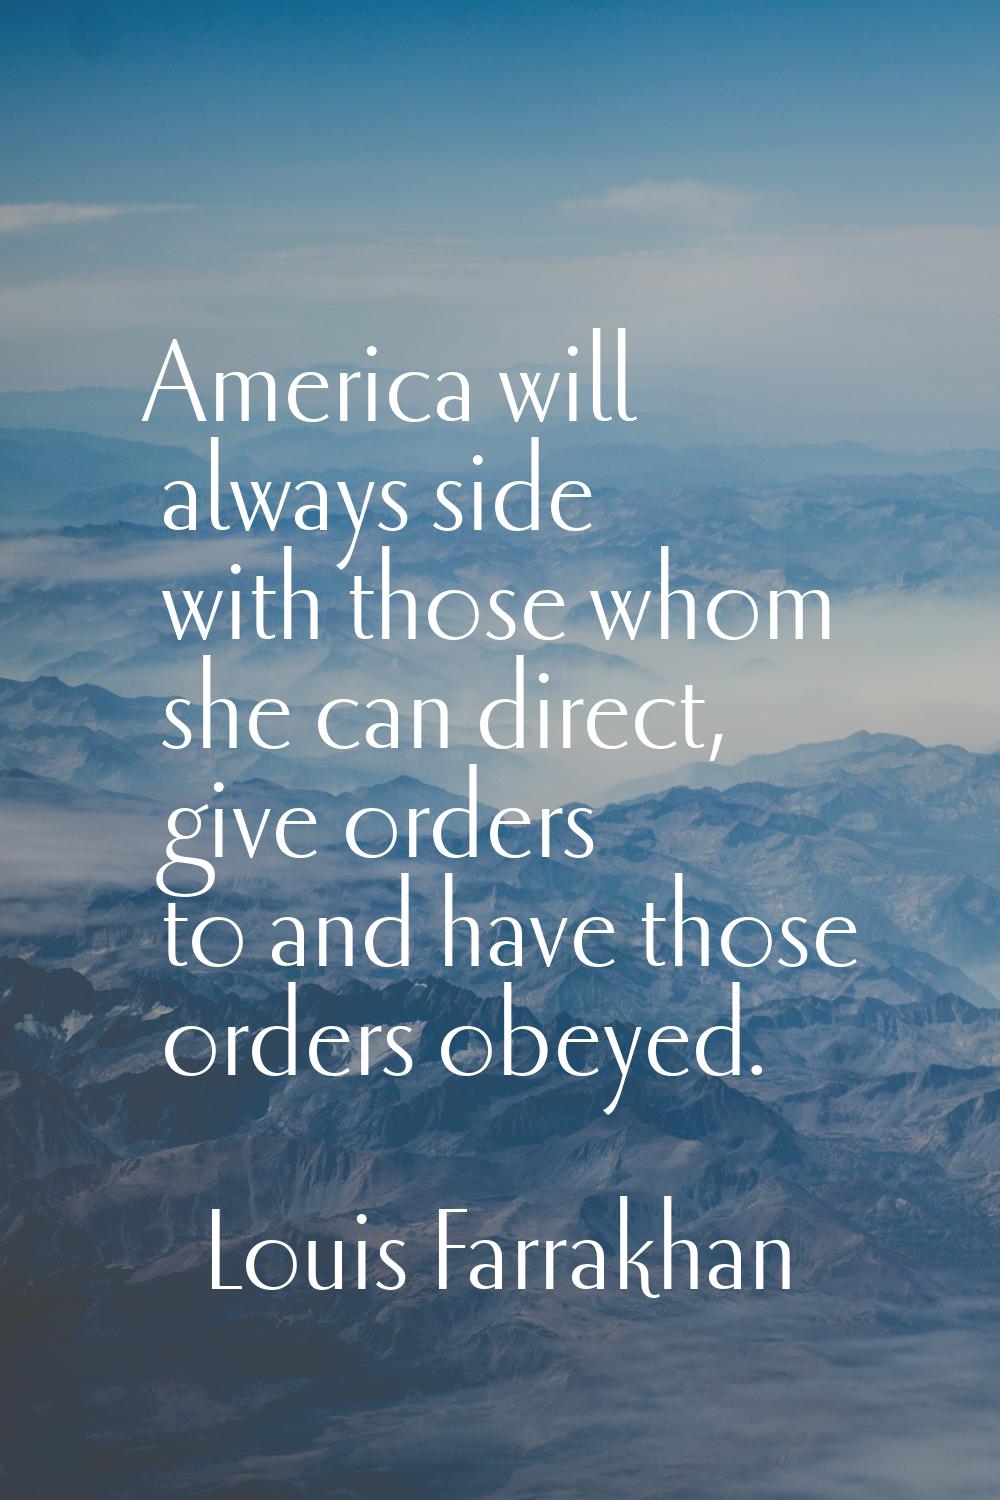 America will always side with those whom she can direct, give orders to and have those orders obeye